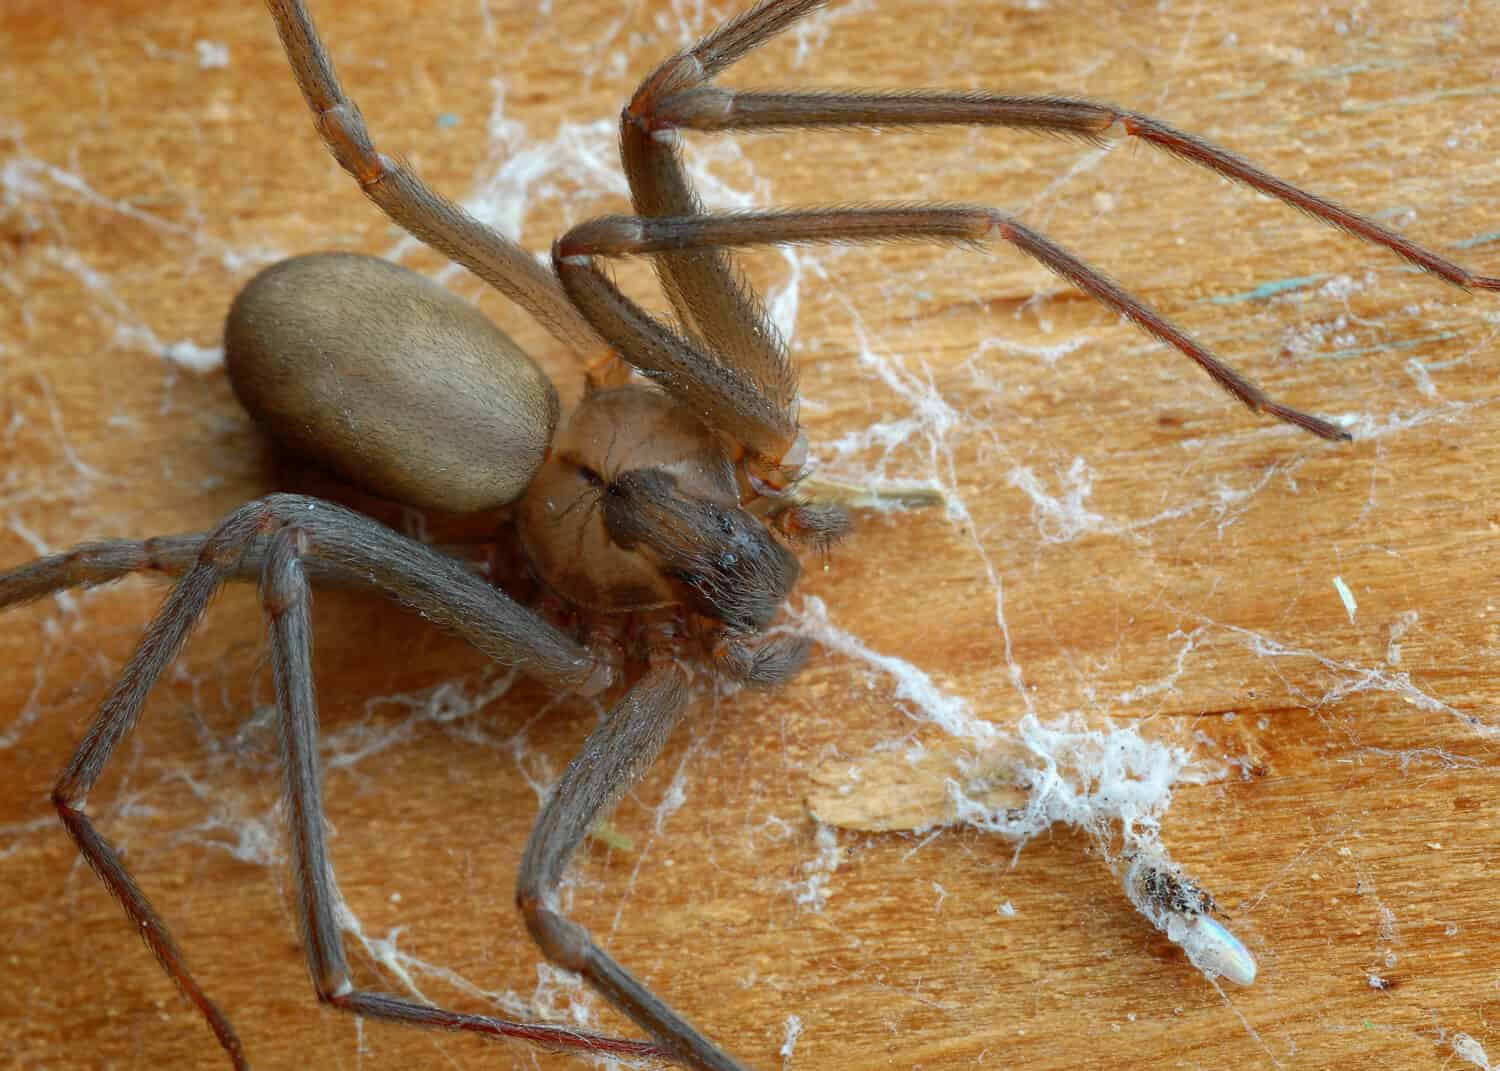 Close-up of a brown recluse spider